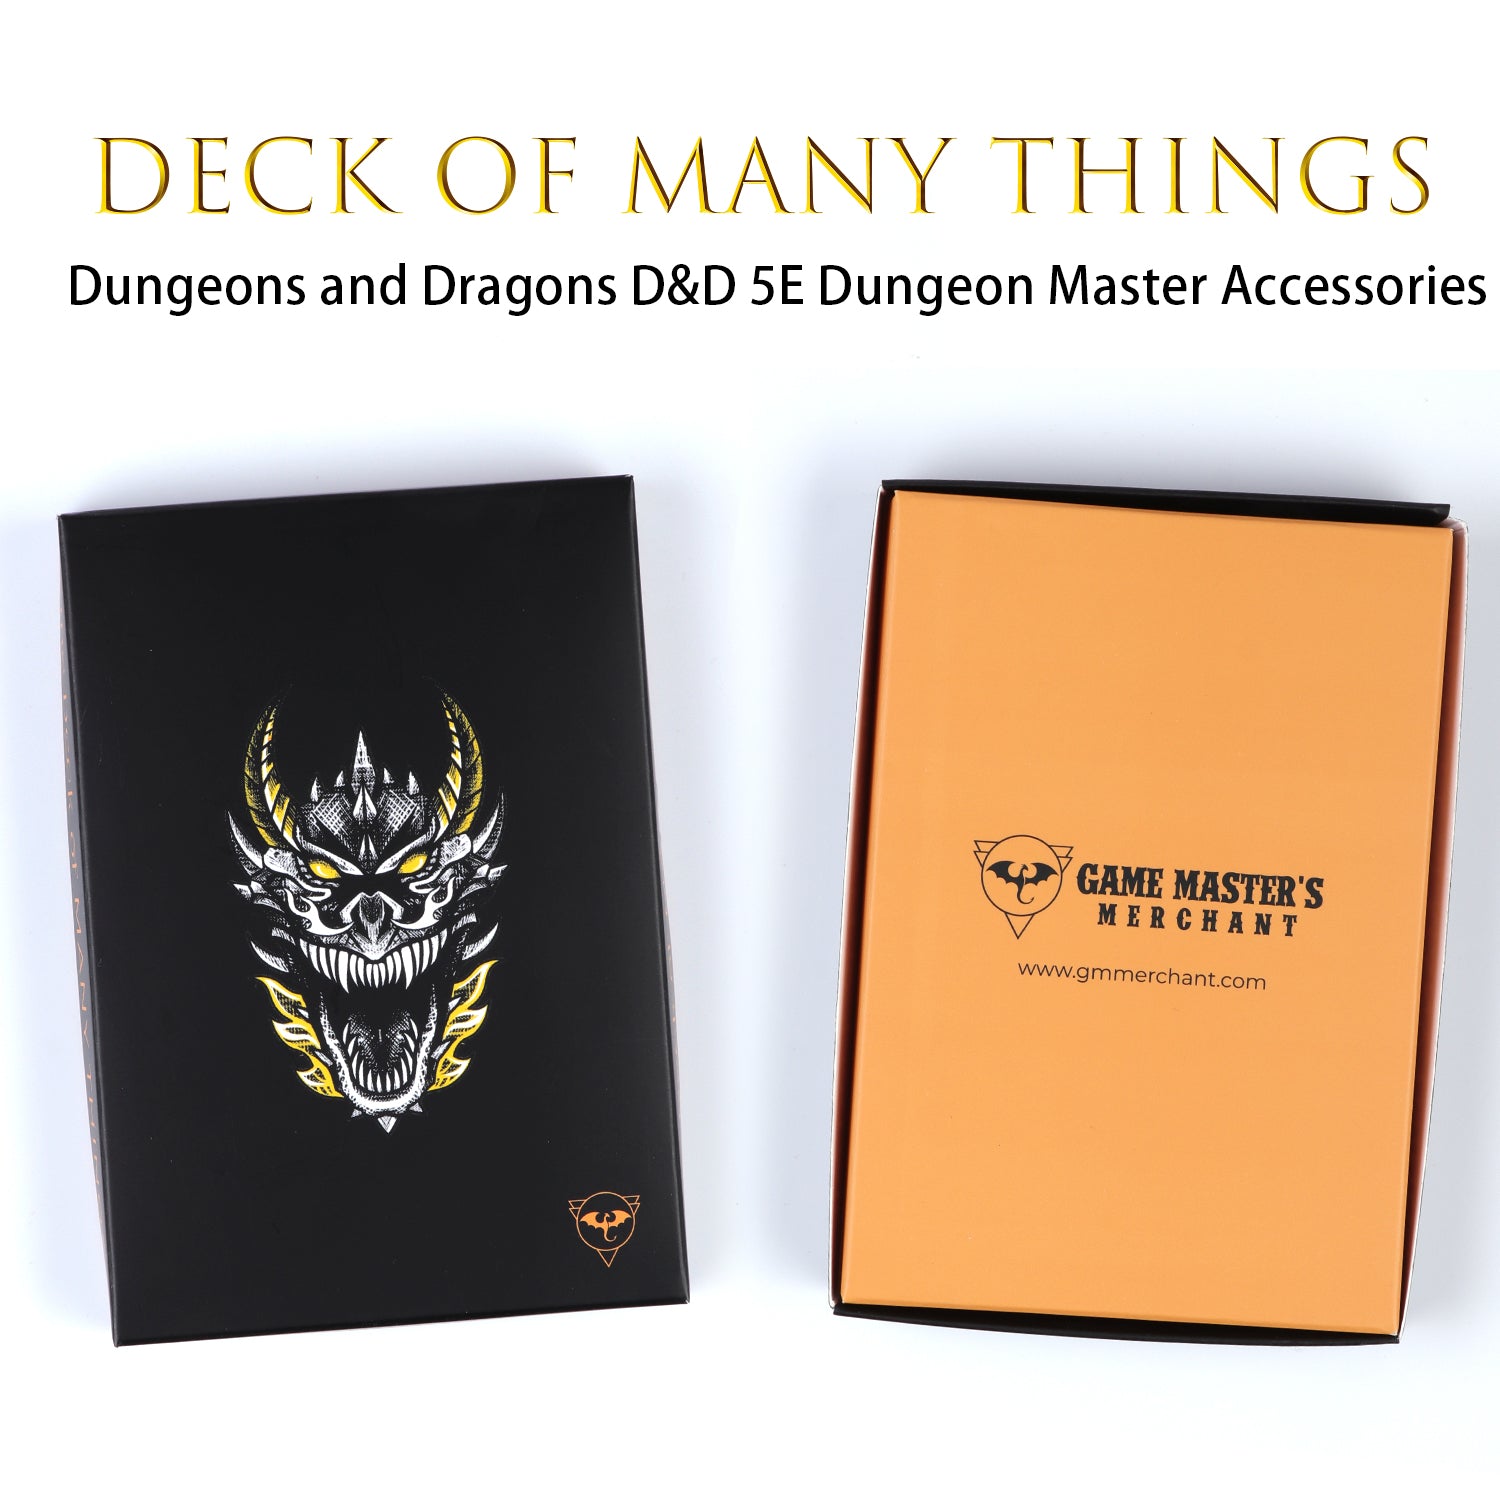 The Deck of Many Things – The Game Master's Merchant